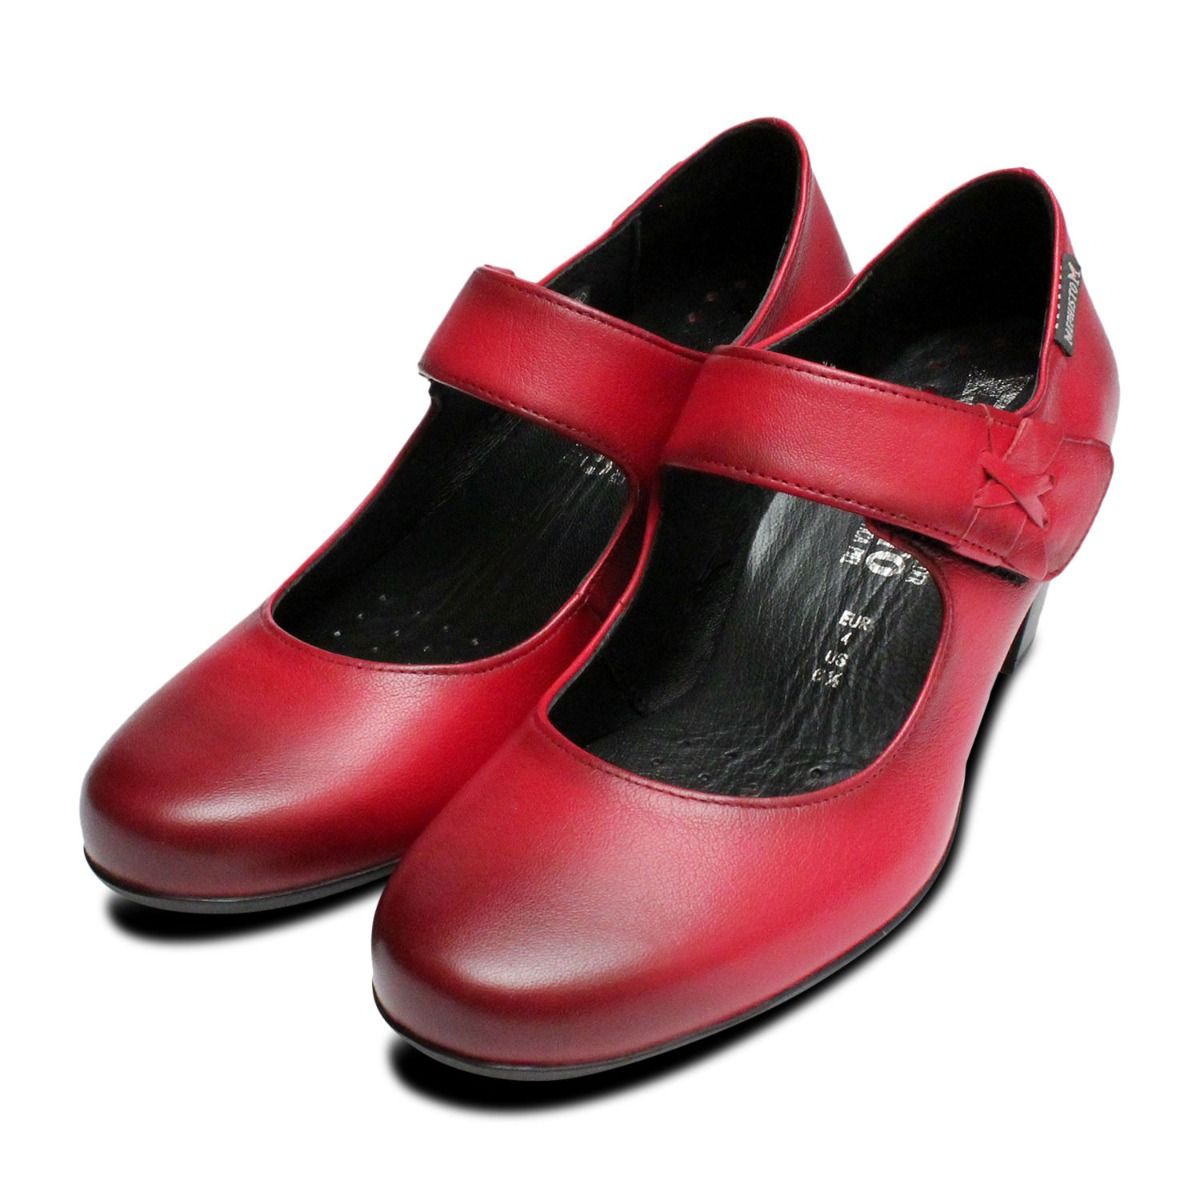 red leather mary jane shoes